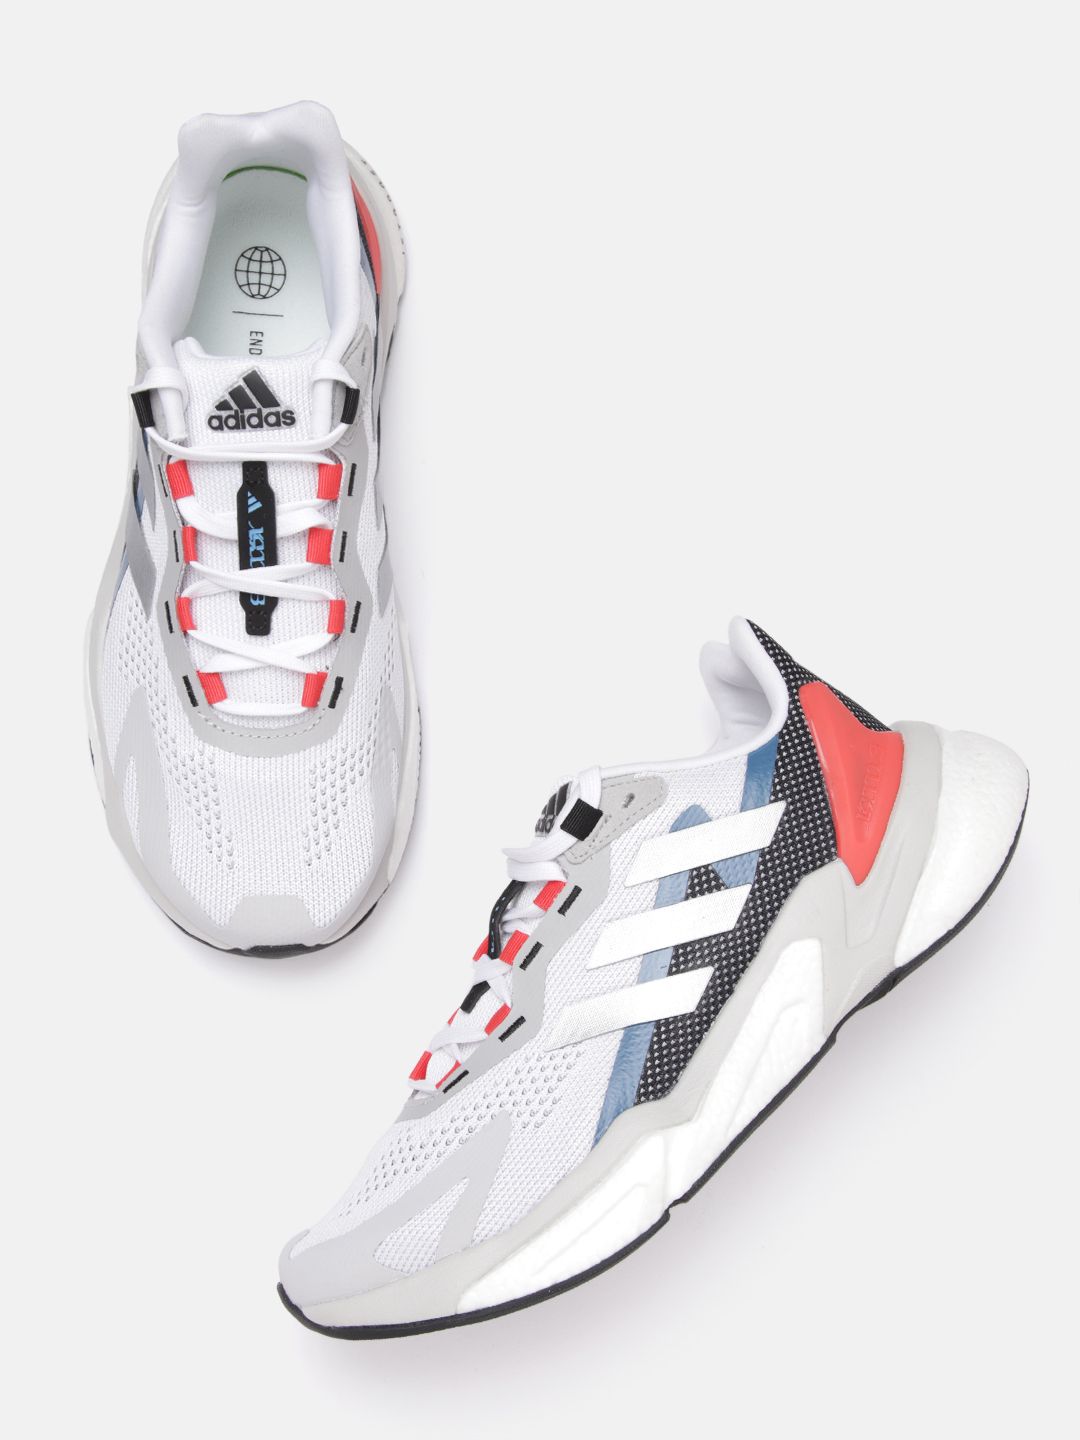 ADIDAS Unisex White & Blue Woven Design X90000L3 U Running Shoes Price in India